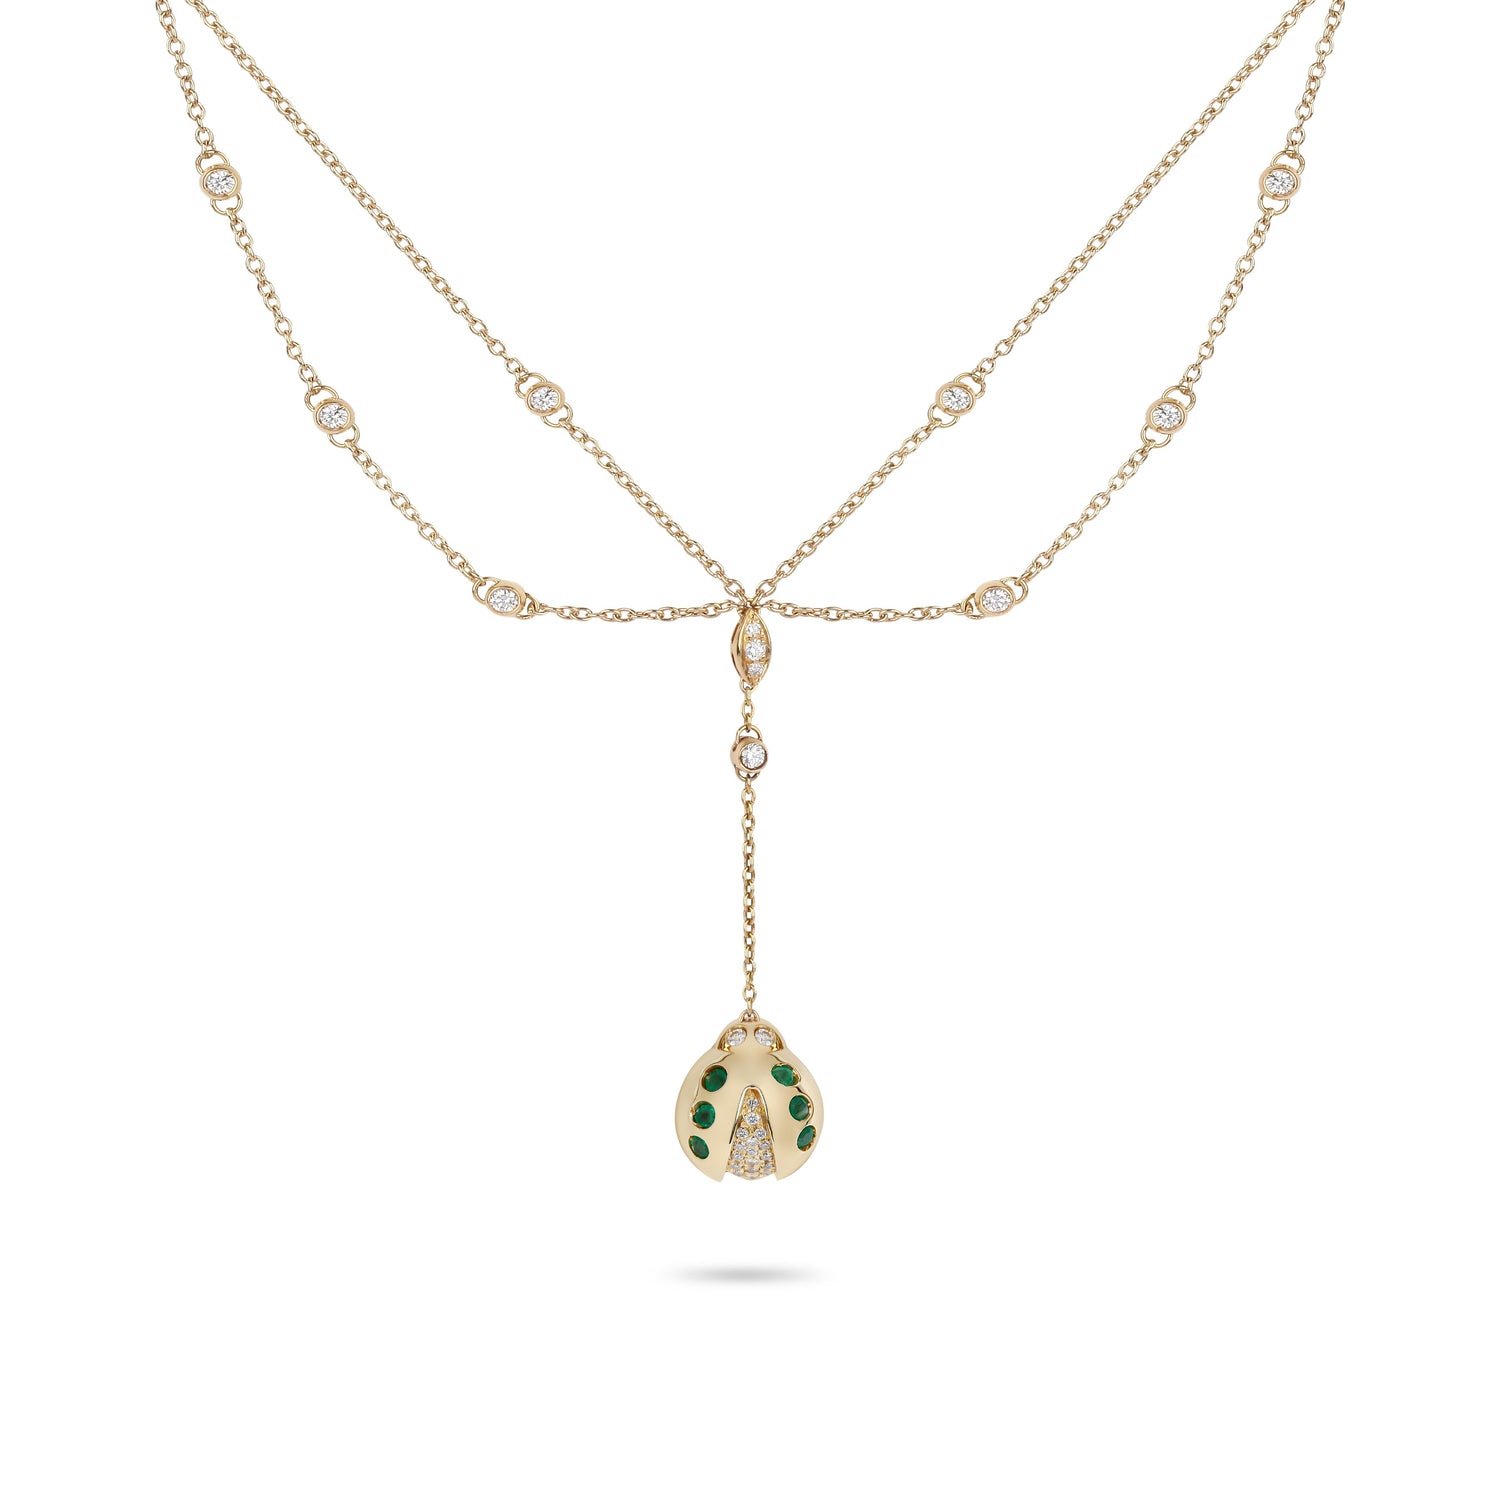 Lady Bug Diamond & Emerald Yellow Gold Chain Necklace | Necklaces For Women 